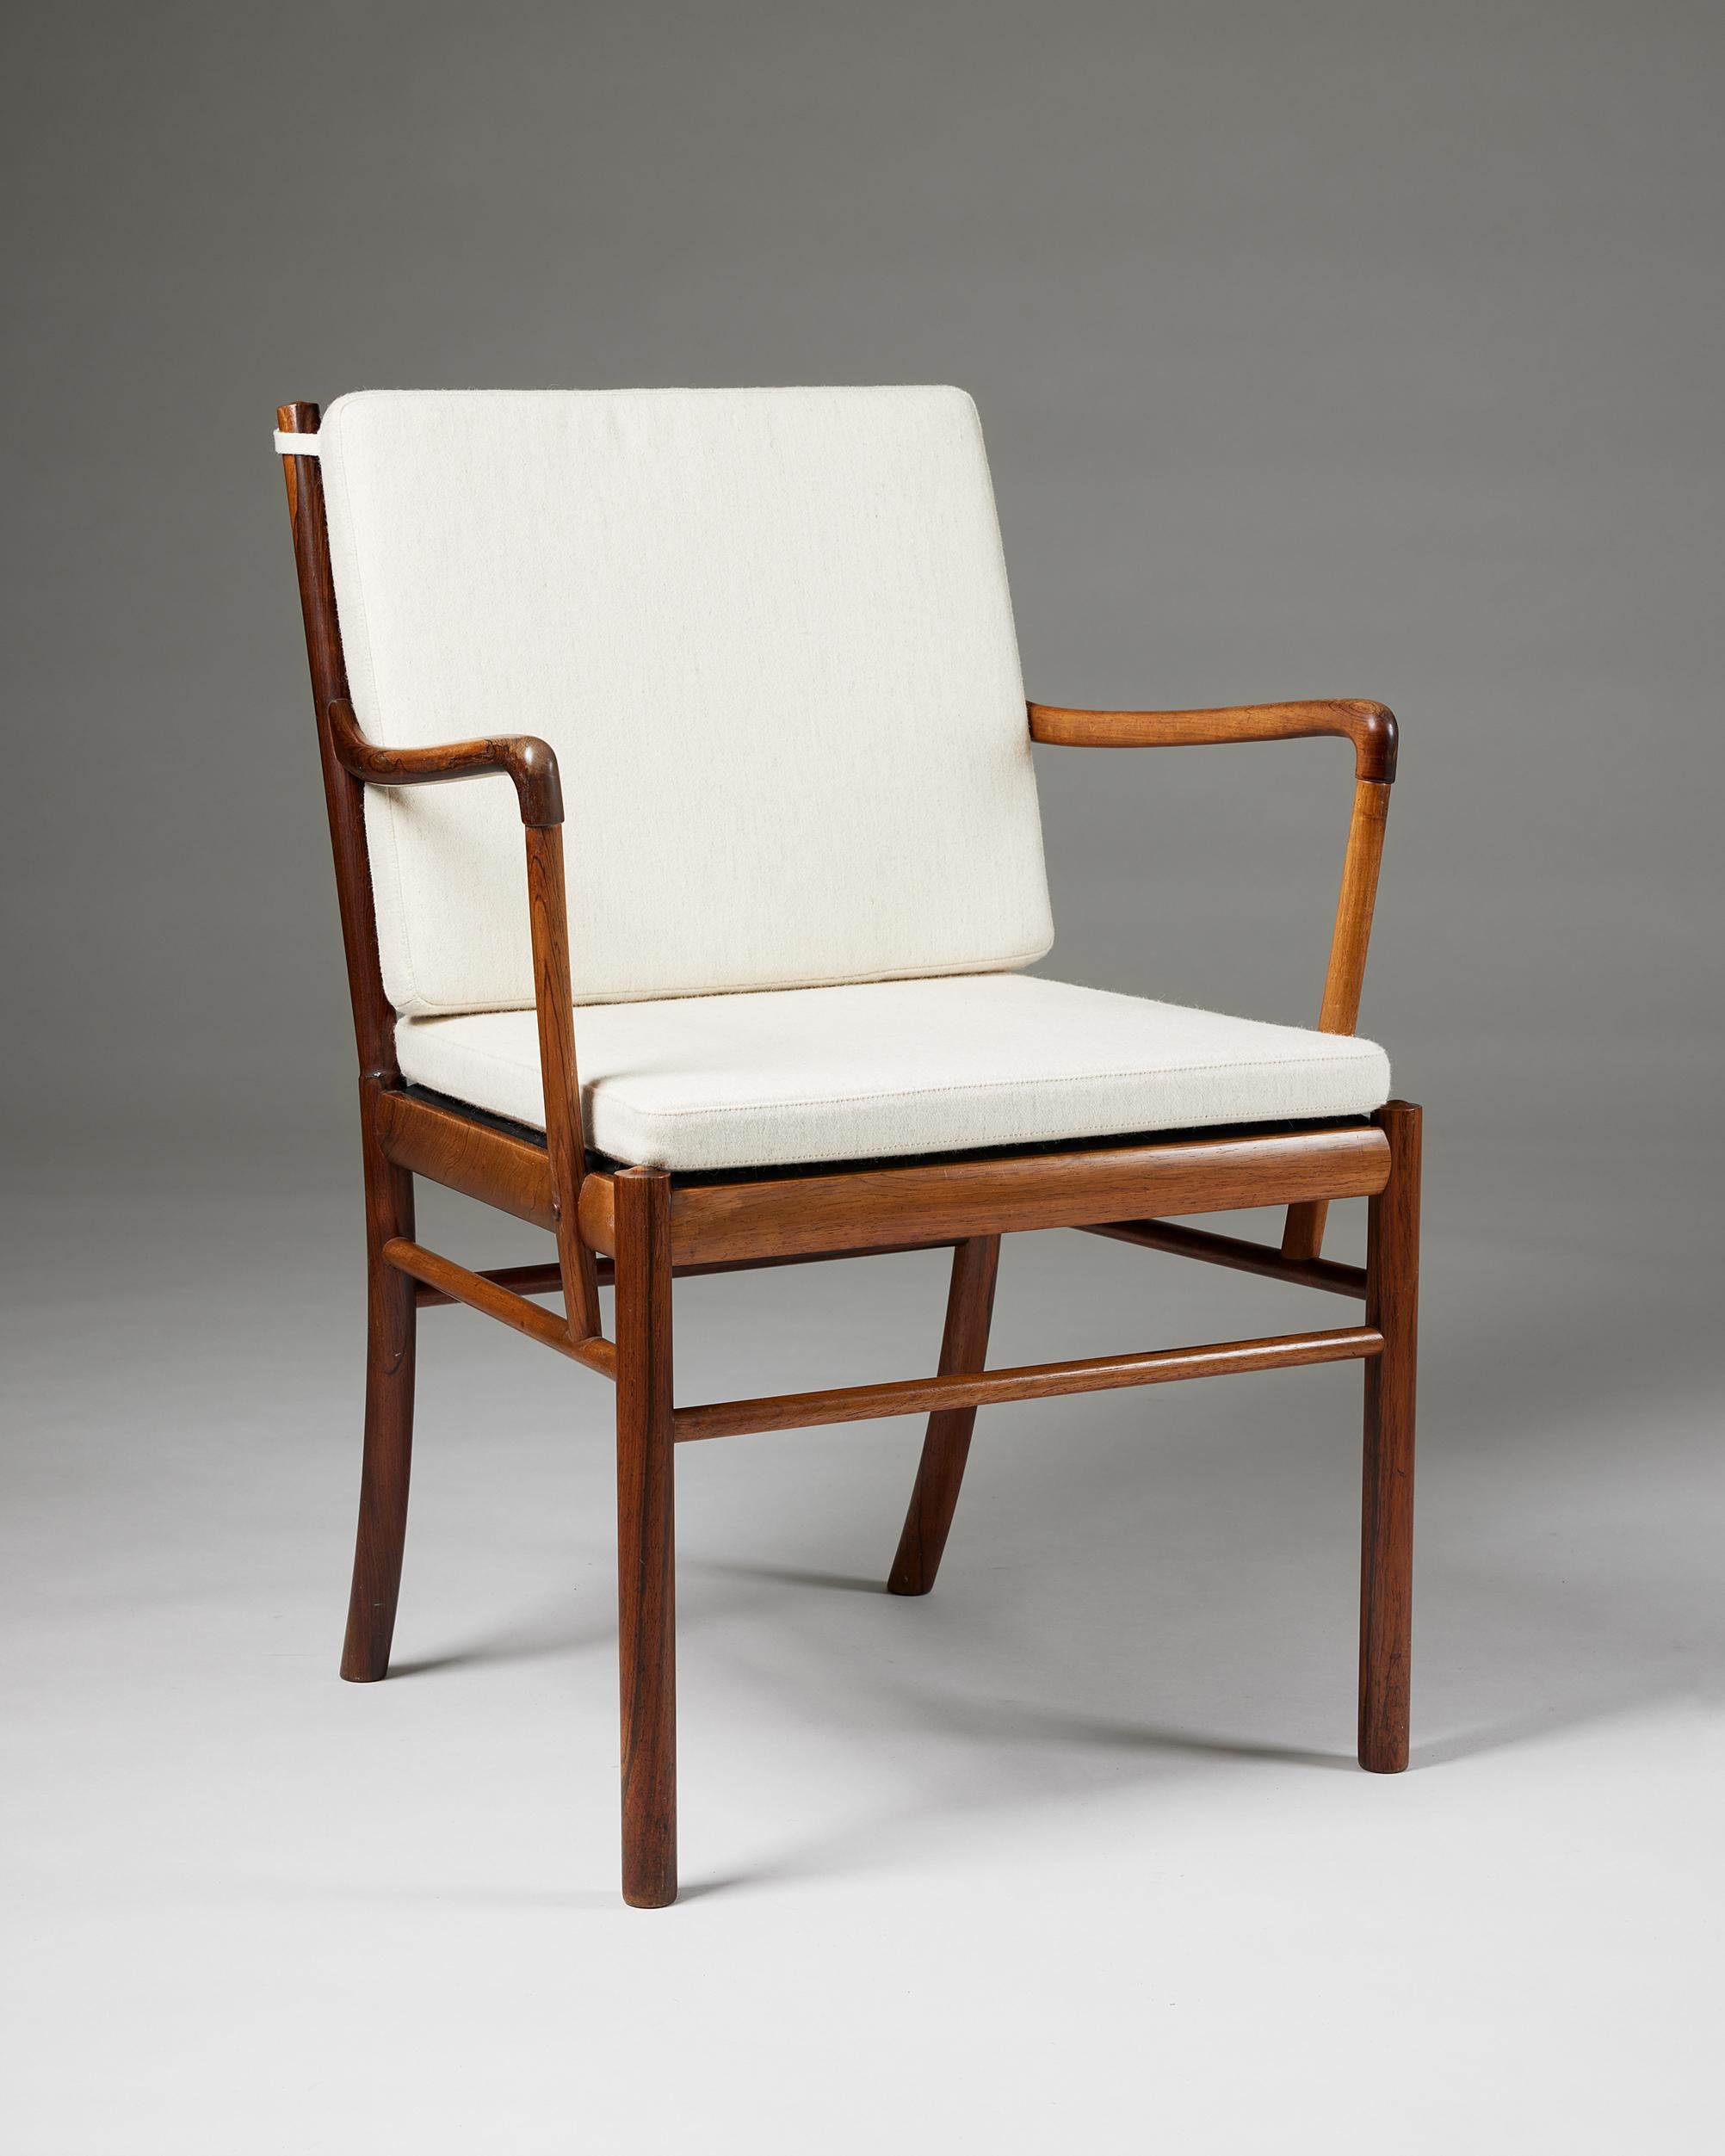 Armchair ‘Colonial’ designed by Ole Wanscher for Poul Jeppesen,
Denmark, 1949.

Savak wool upholstery and rosewood.

Marked.

H: 86.5 cm / 2' 10''
W: 63.5 cm / 2' 1''
D: 59 cm / 23 1/4''
SH: 47.5 cm / 18 3/4''
AH: 68 cm / 2' 2 3/4''.